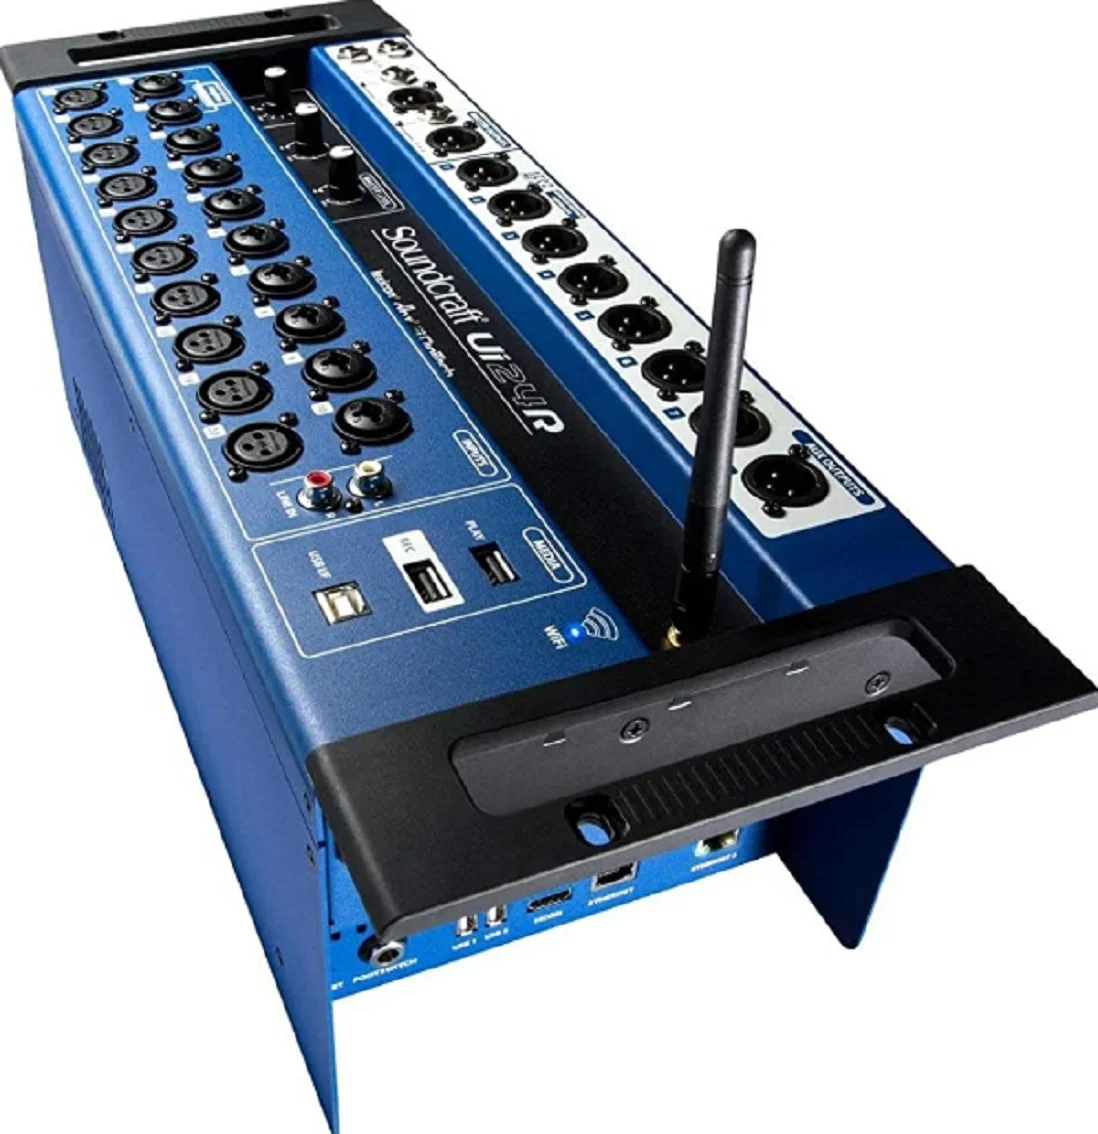 

SUPER SALES Remote-Controlled Digital Mixer, Soundcraft Ui24, 24-Input, Free Shipping